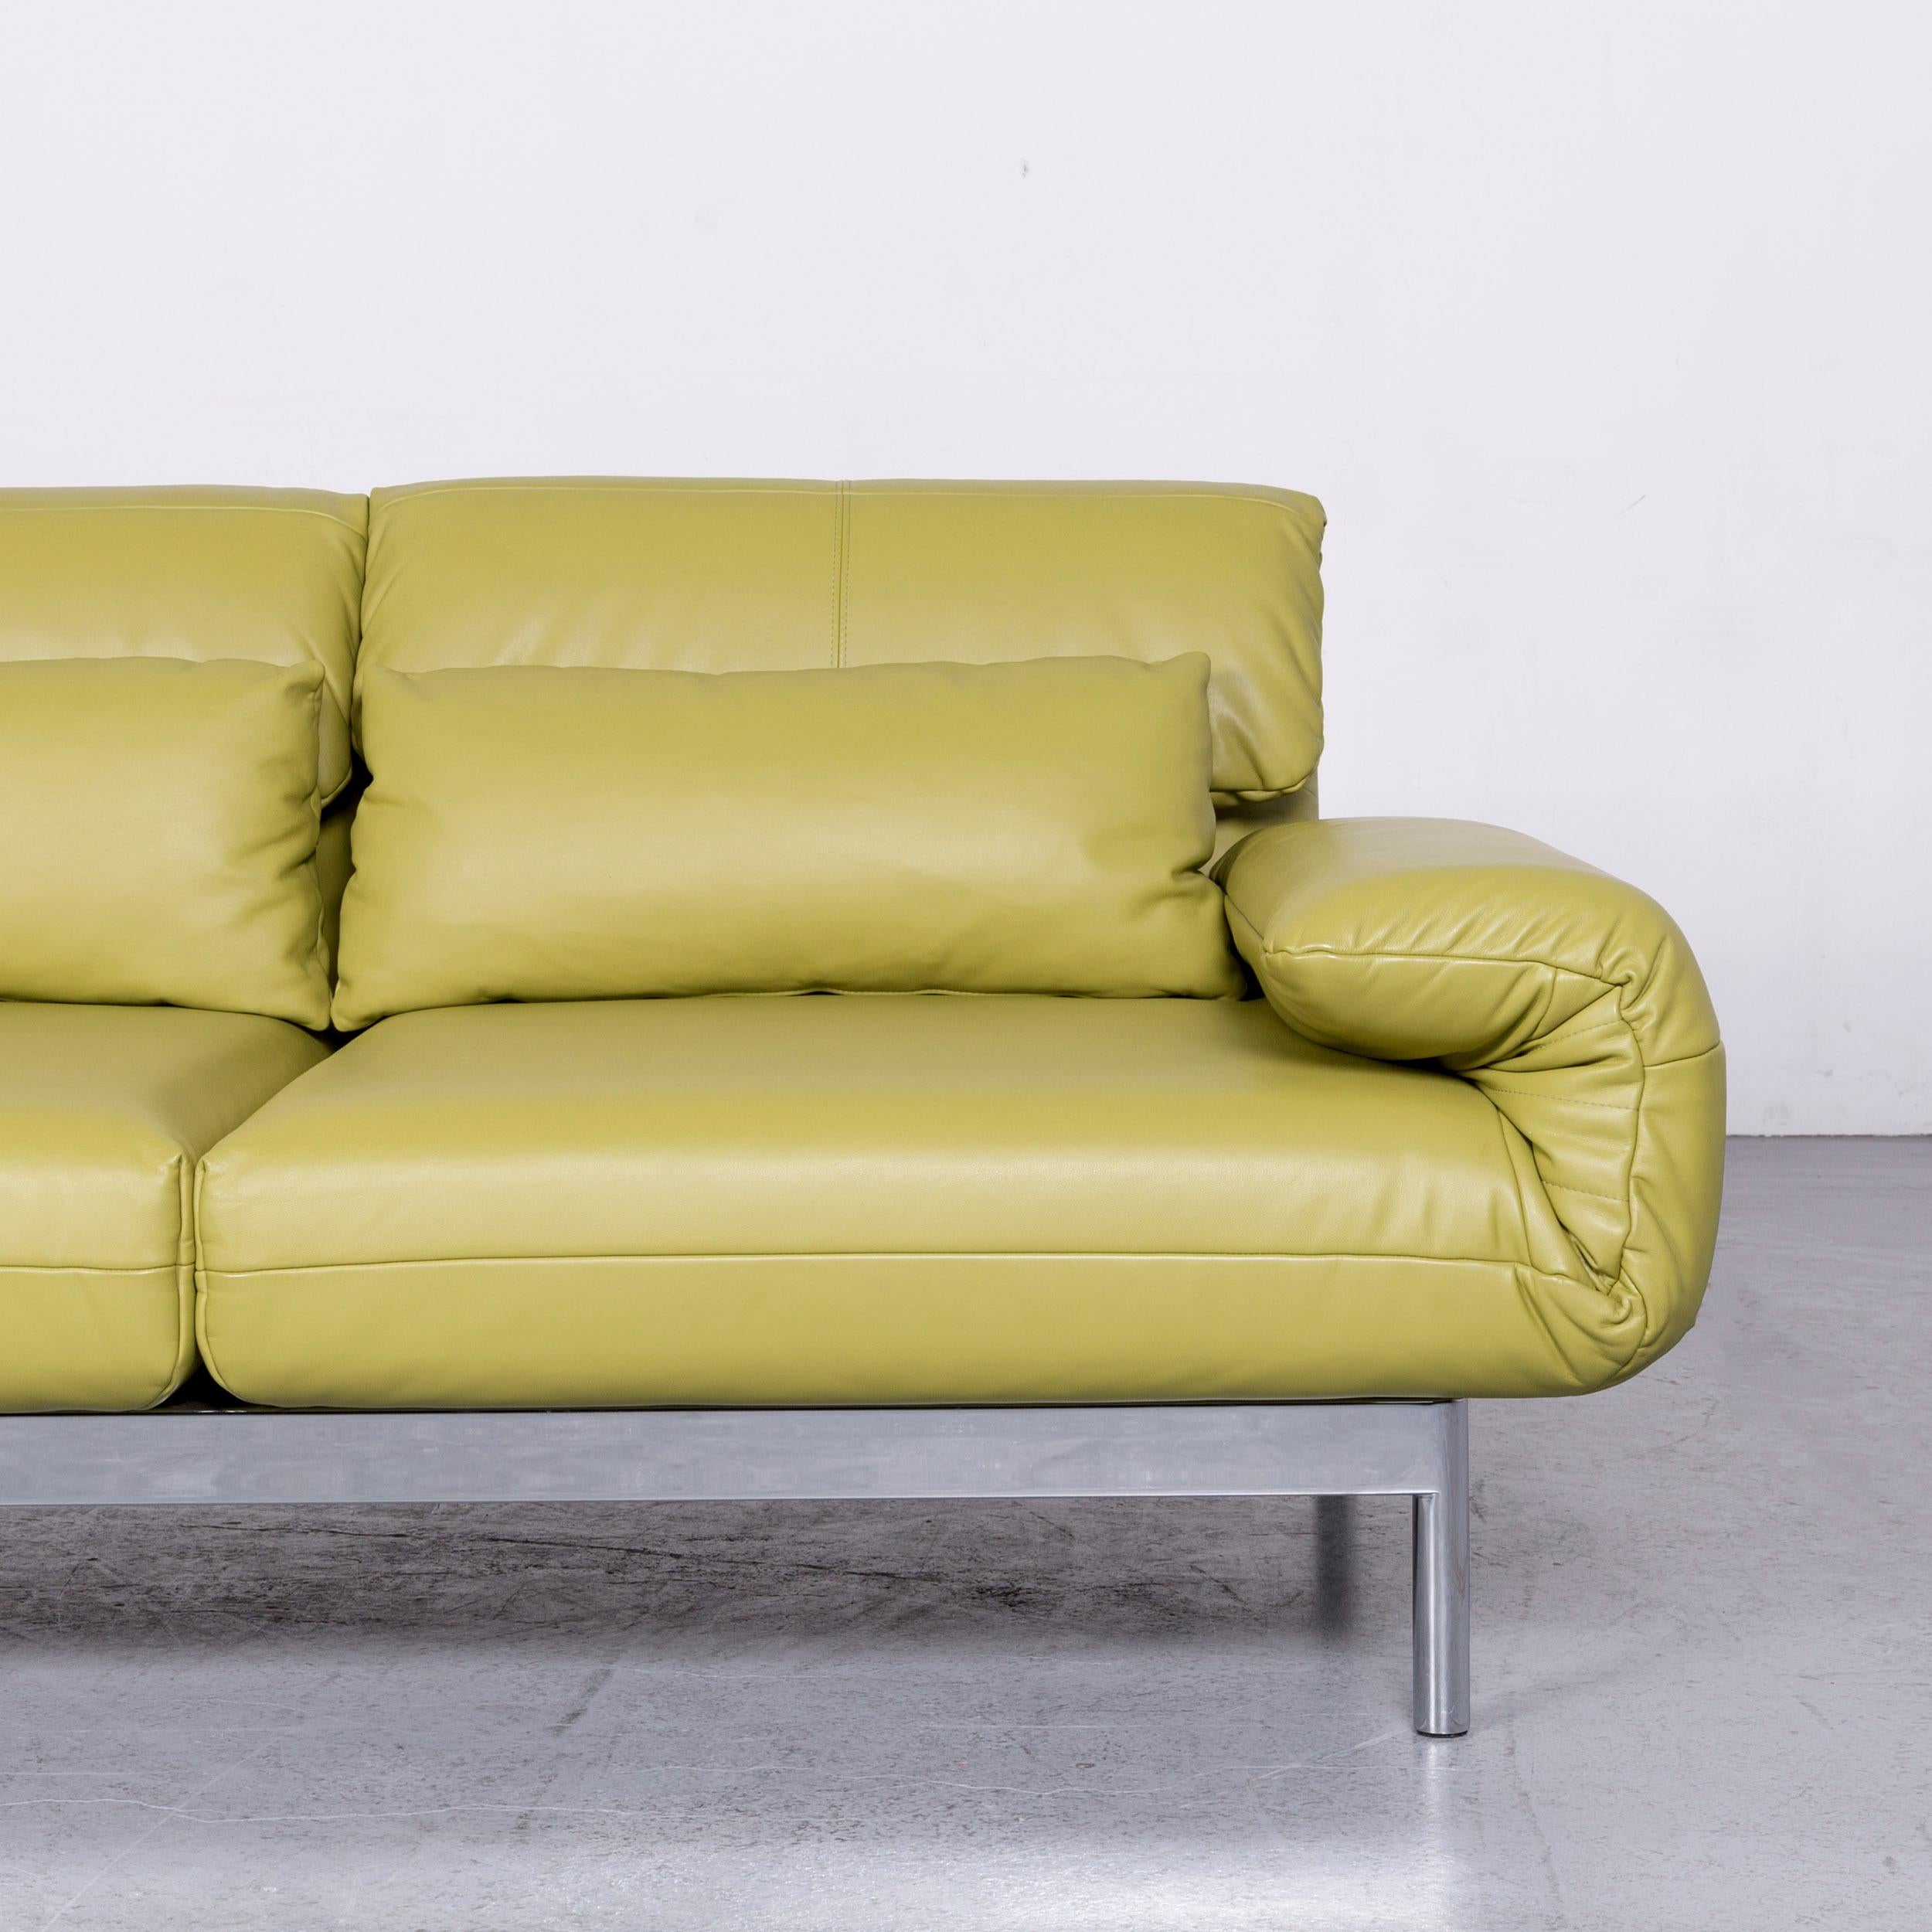 Rolf Benz Plura Designer Sofa Leather Green Relax Function Couch Modern 3